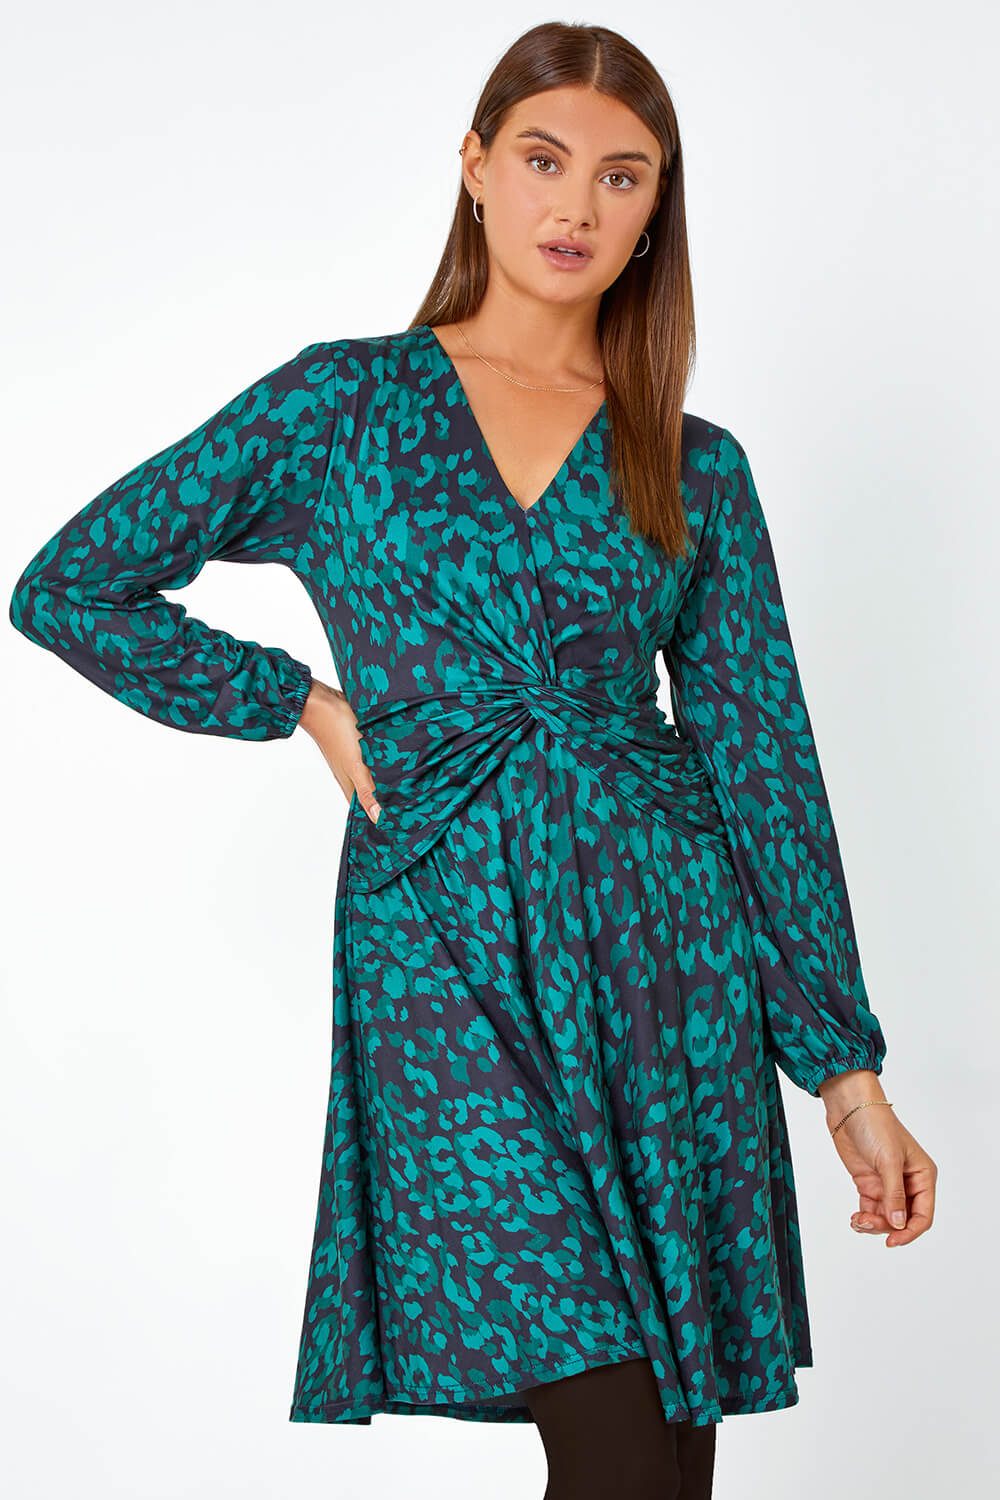 Green Leopard Print Gathered Stretch Dress, Image 2 of 5